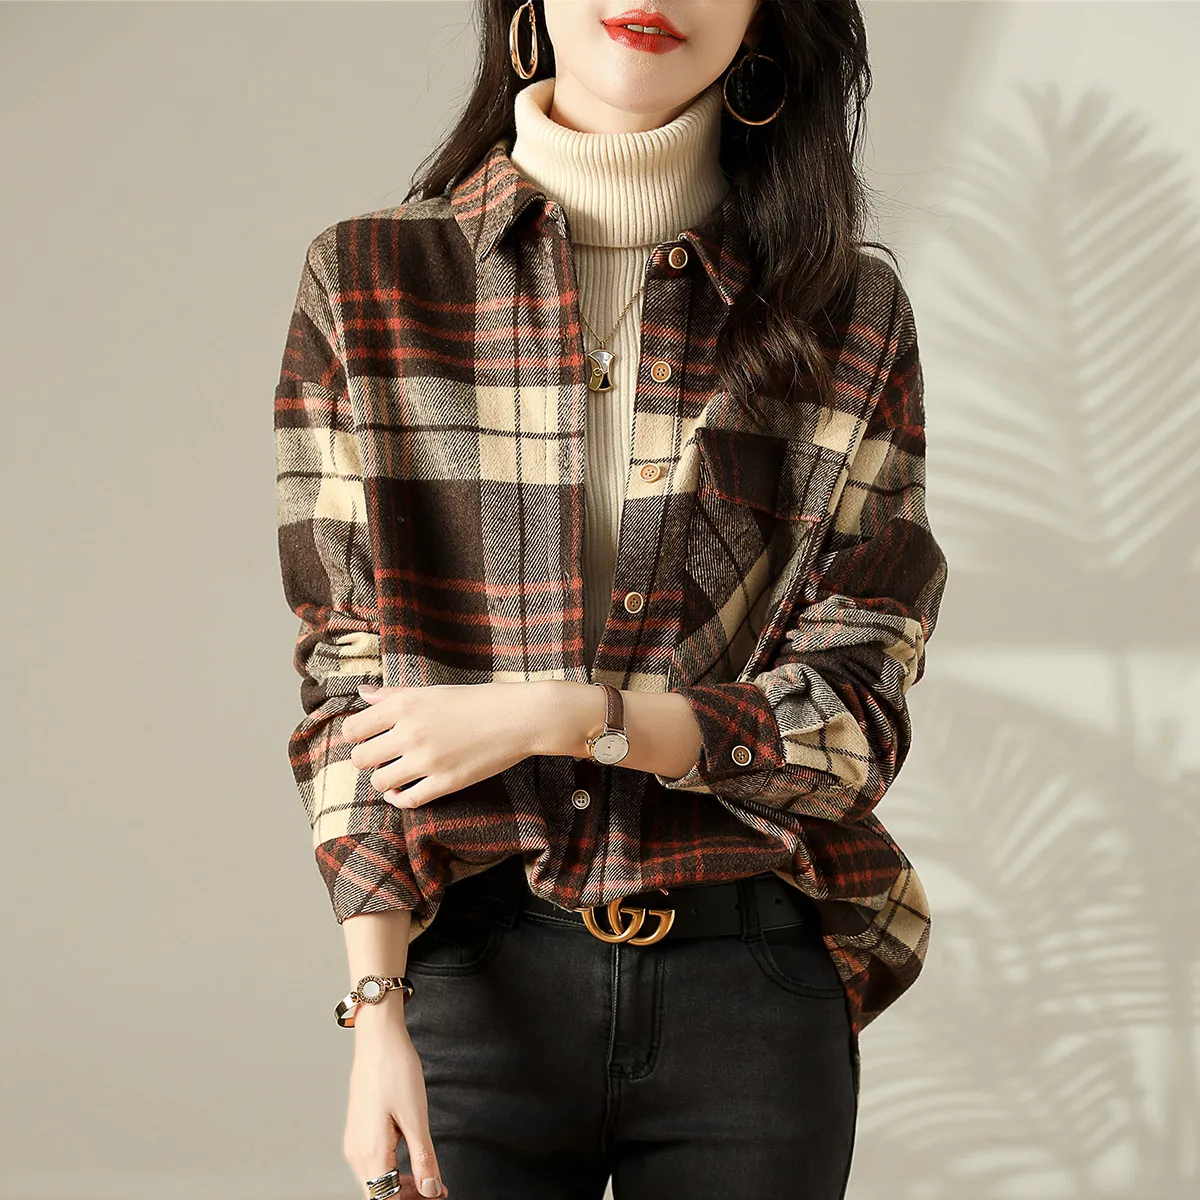 

Blended Women's Blouse Plaid Polo Girl's Shirt Long Sleeve Top Spring Autumn Fashion Clothing Casual Lady Blusas Houthion